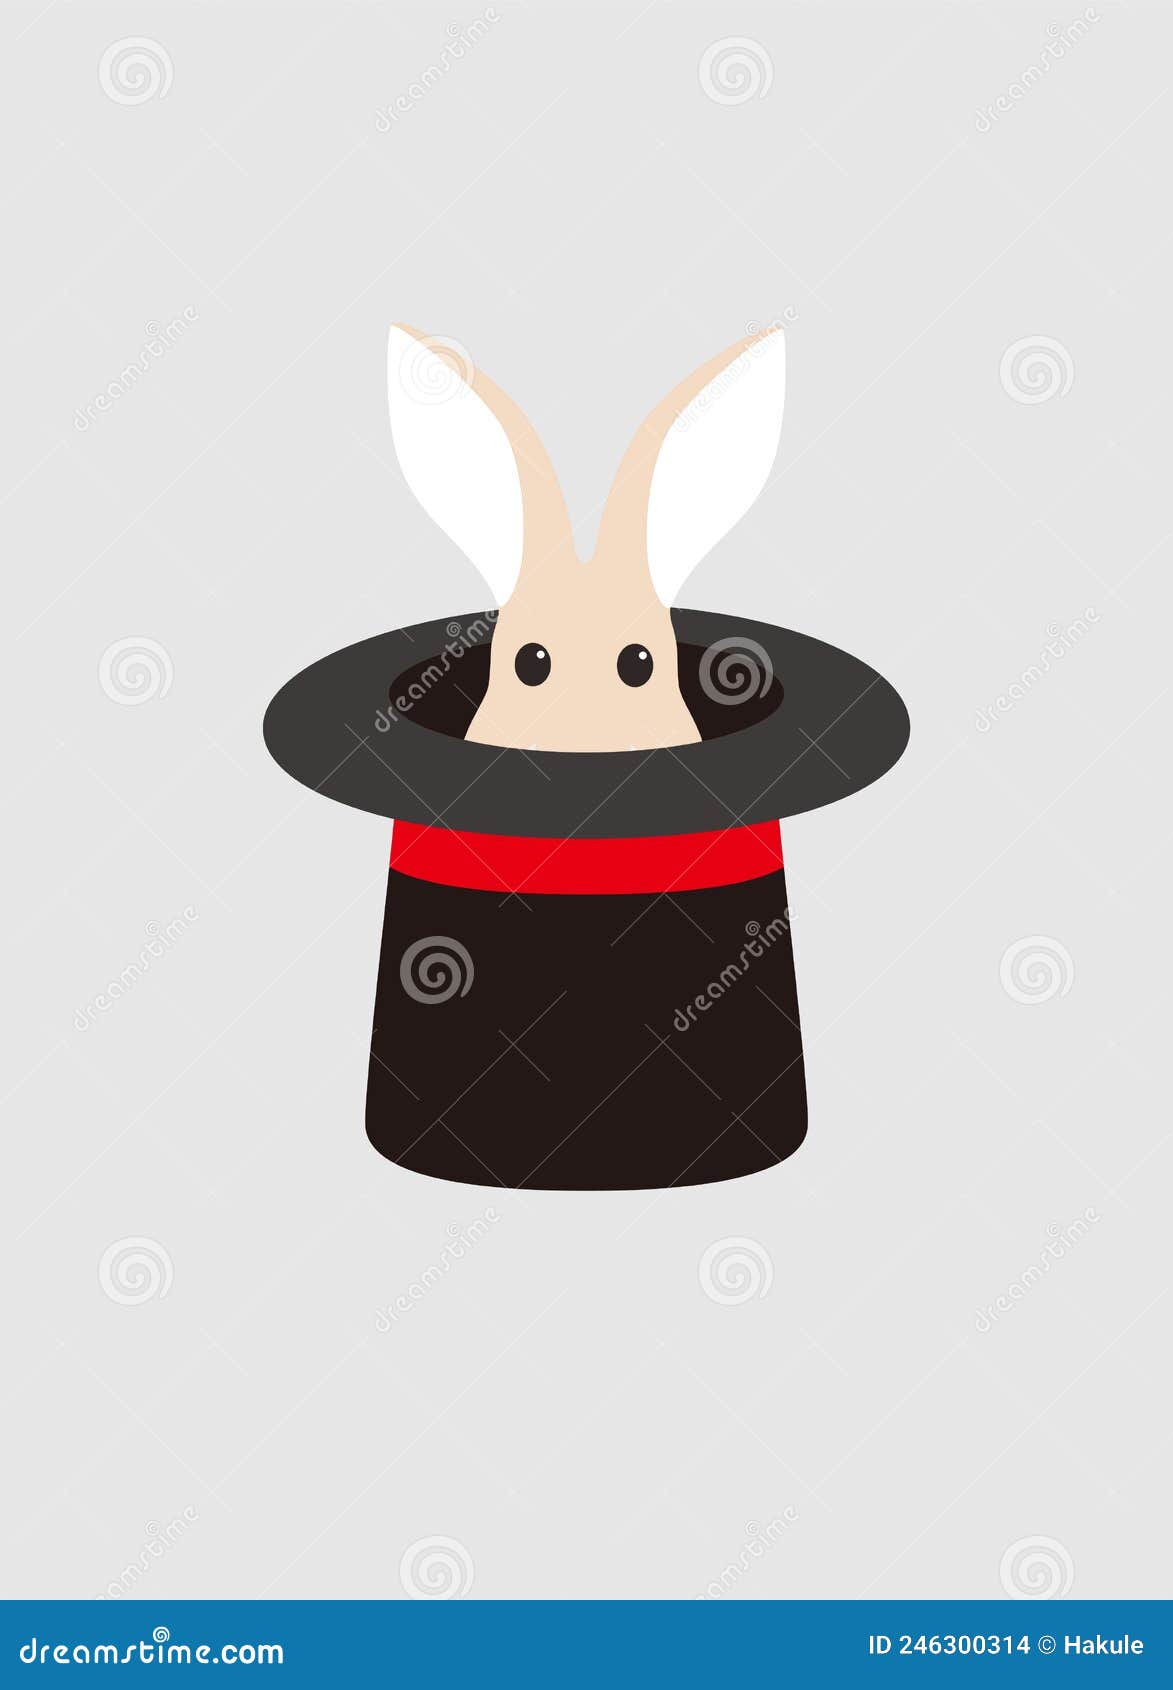 portrait of rabbit, sitting on the hat, watching, cool style